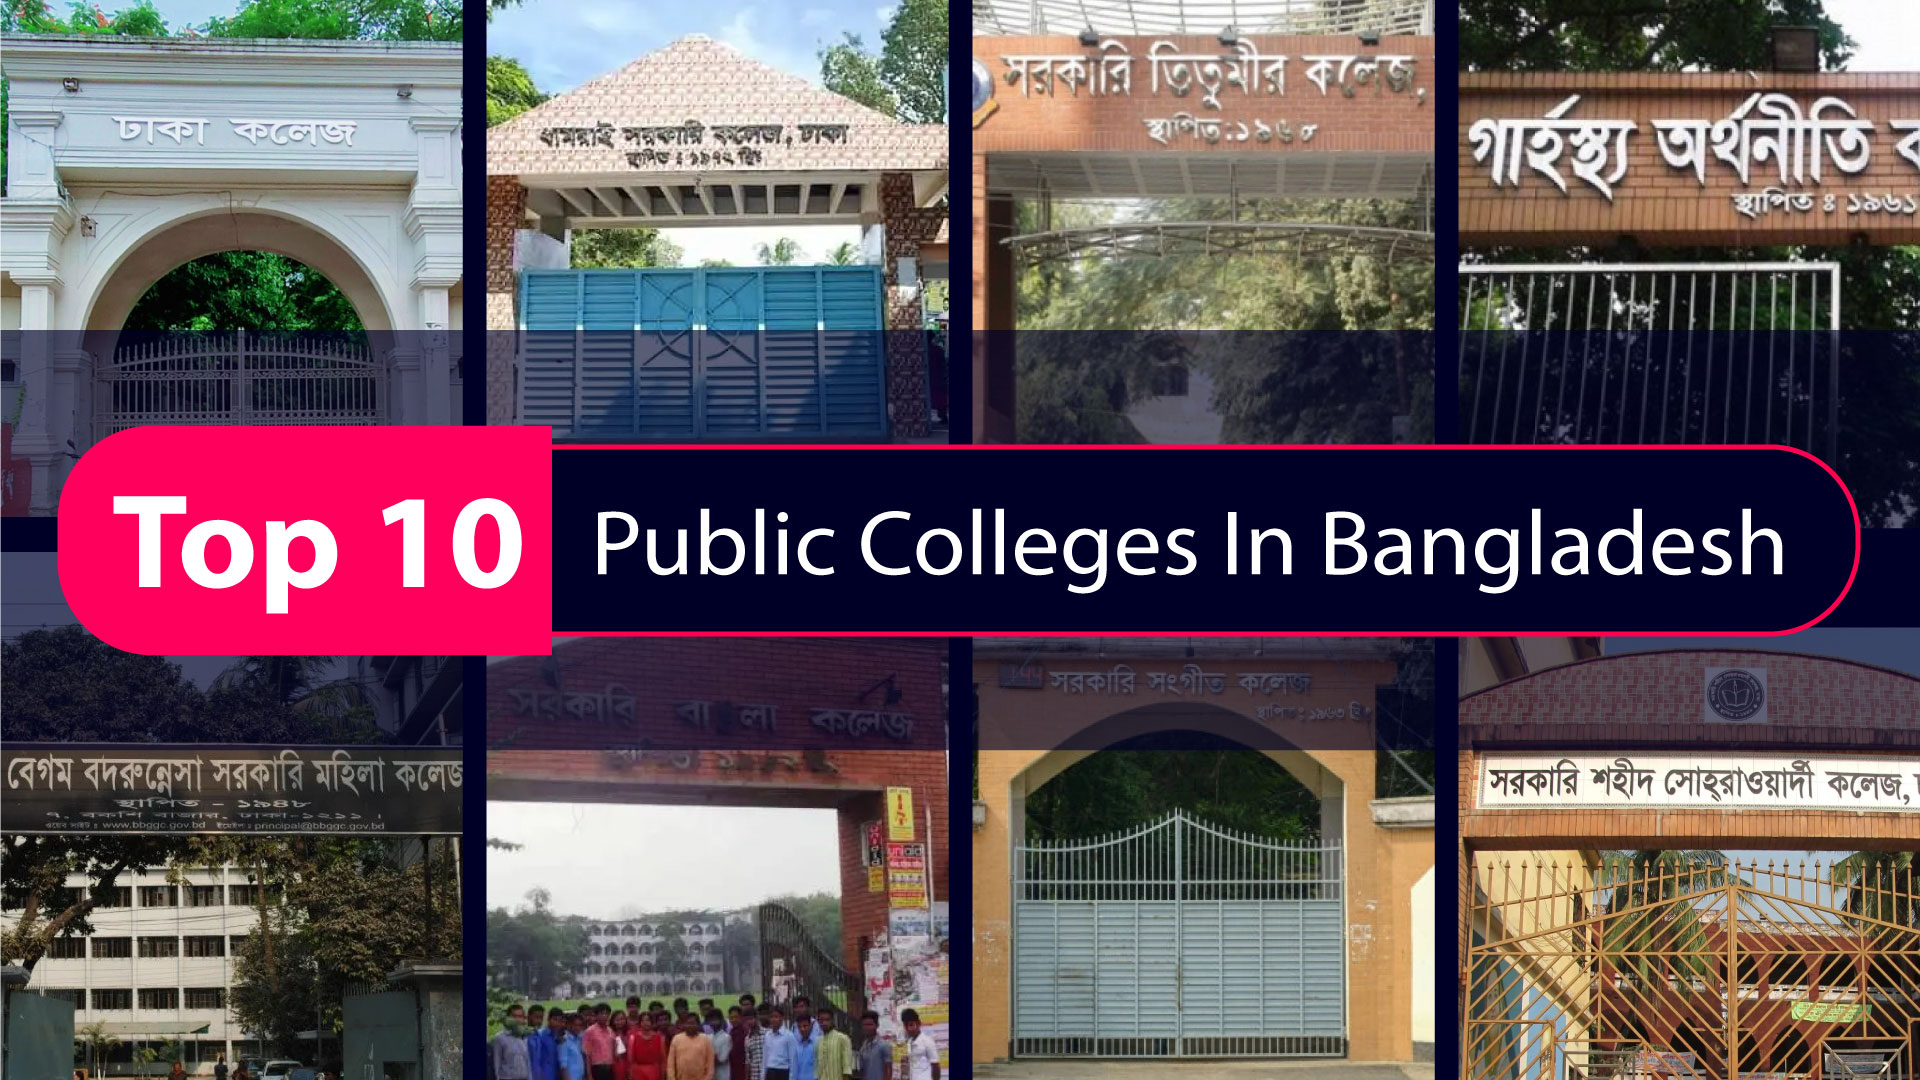 Government College in Dhaka